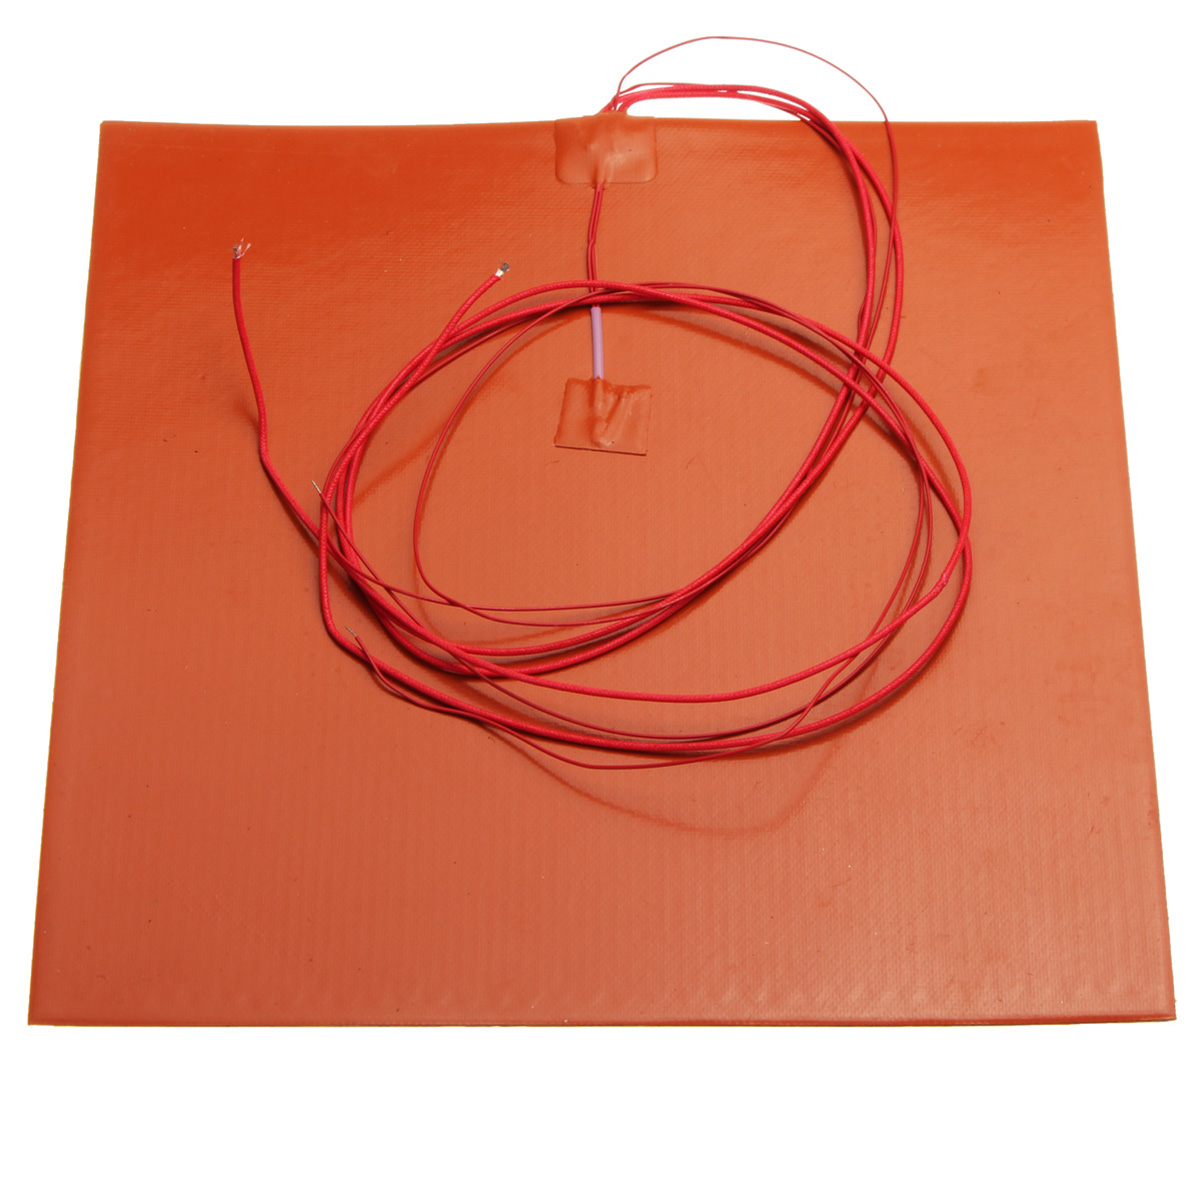 500W 120V 300mm*300mm Thermistor Silicone Heated Bed Heating Pad for 3D Printer 7